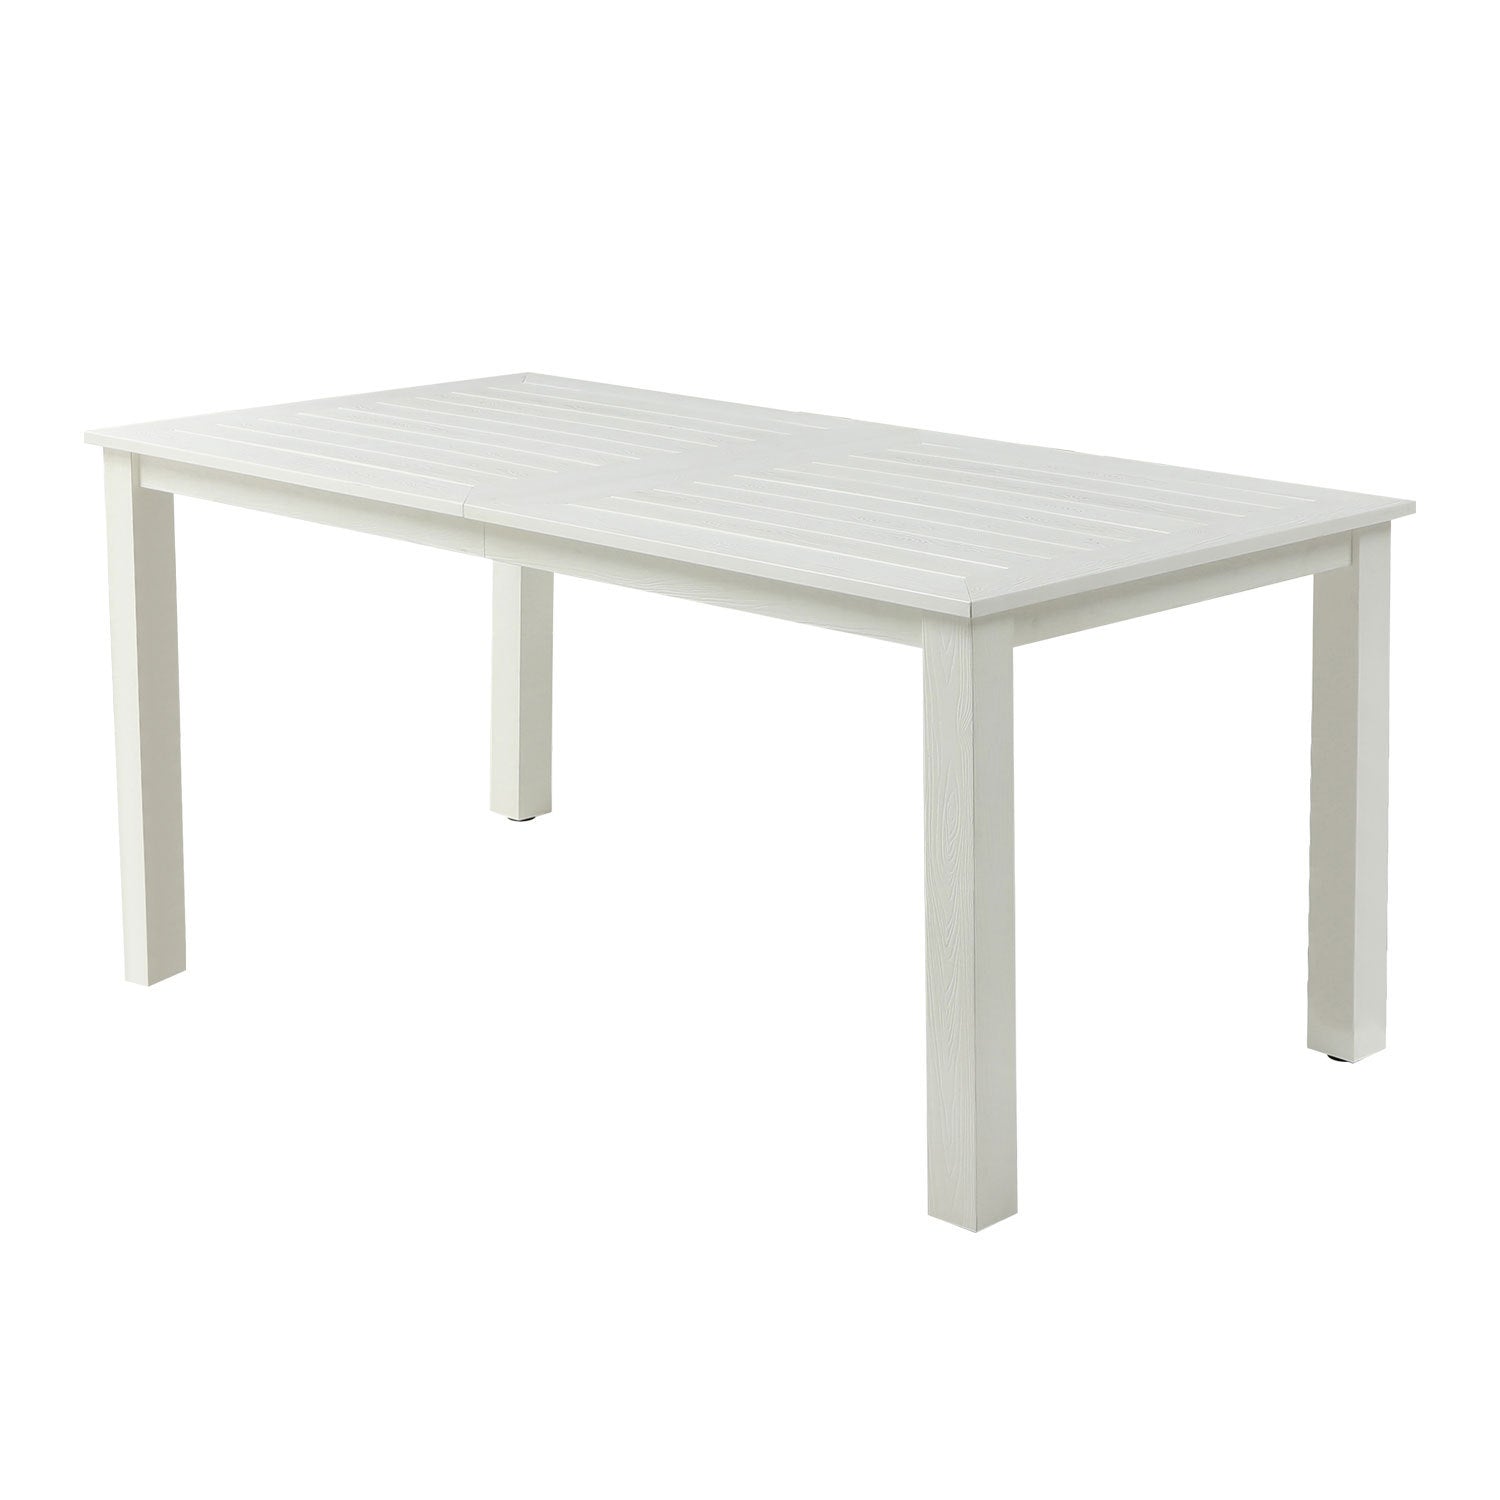 HIPS Outdoor Dining Table,70.86" Rectangular All white-hdpe